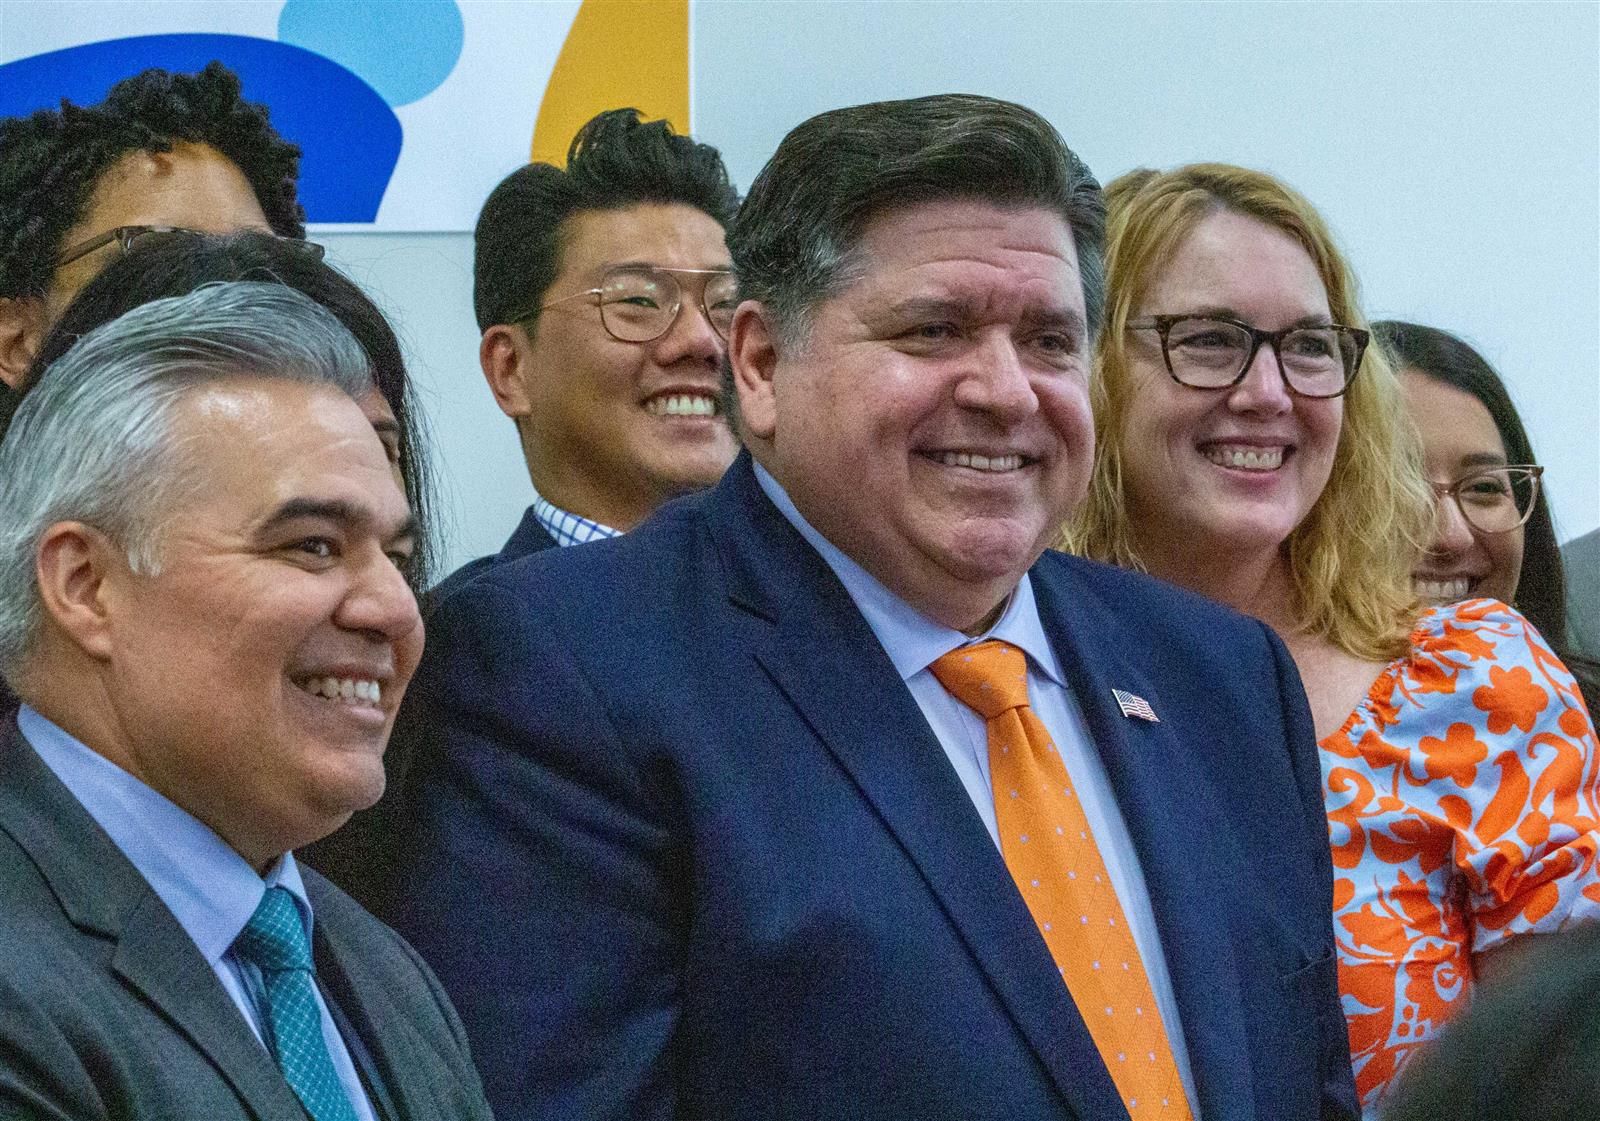 Gov. JB Pritzker poses for photos with early childhood advocates 